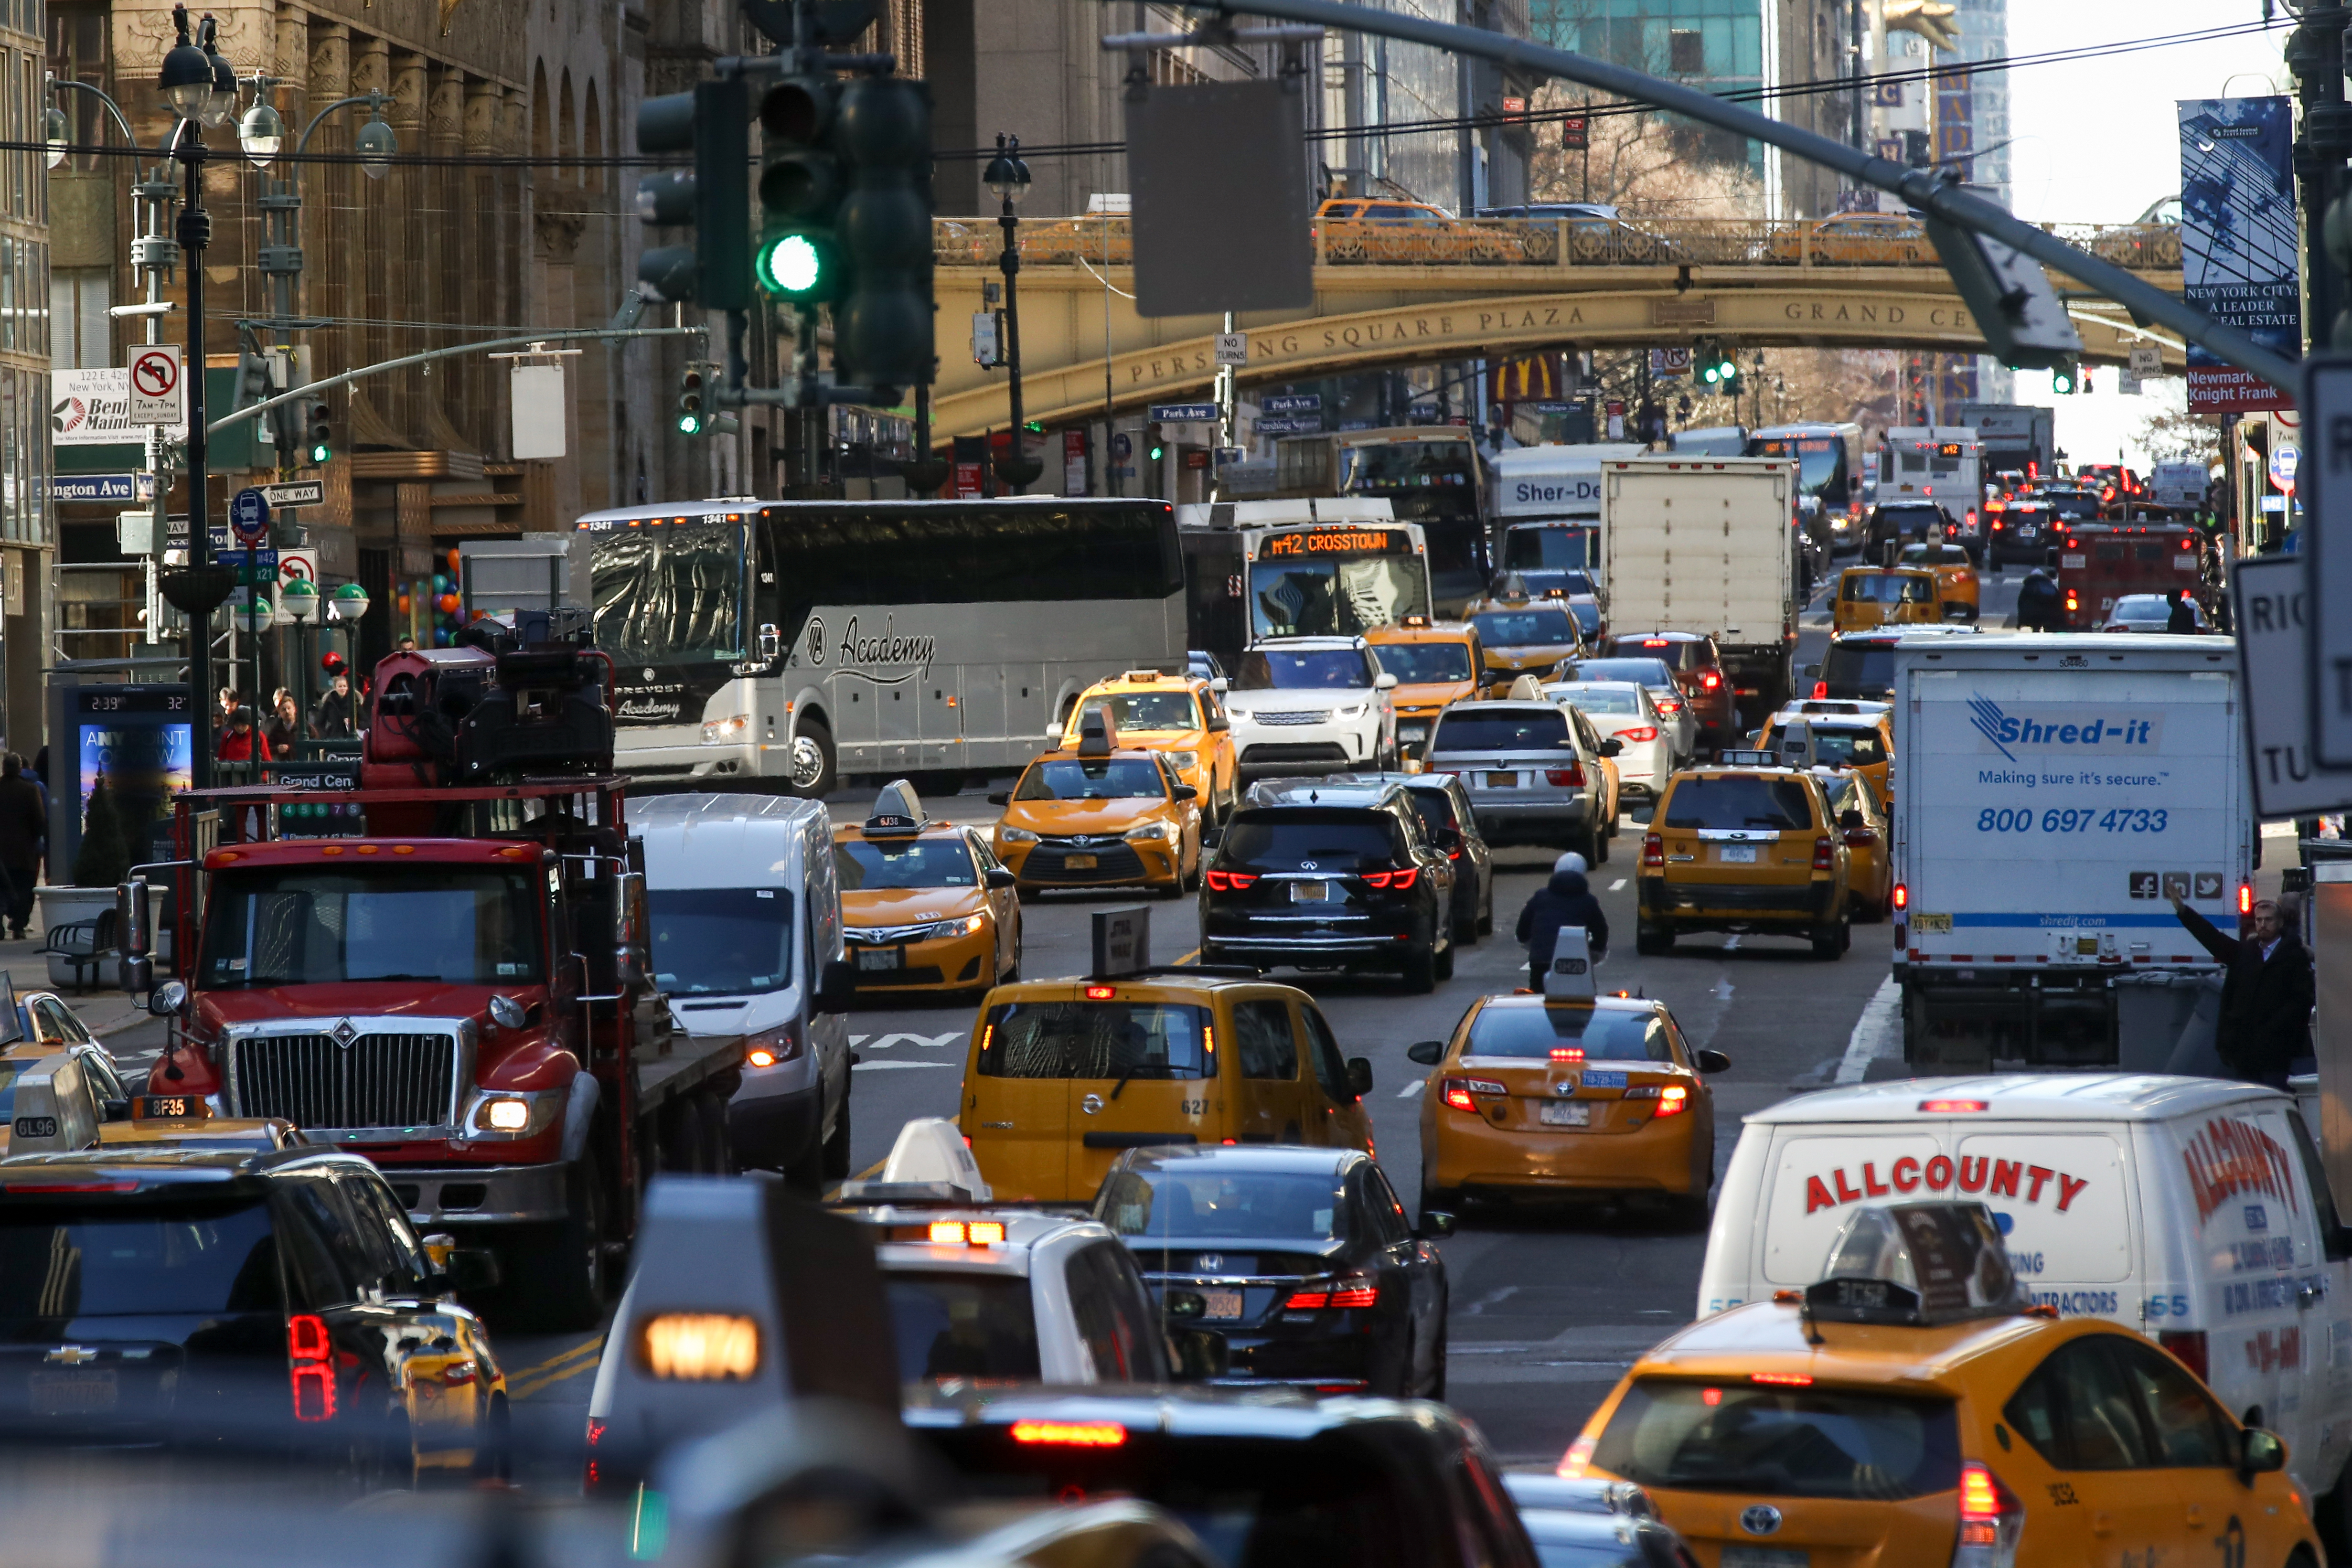 New York City Explores Congestion Pricing Options To Ease Traffic Snarls